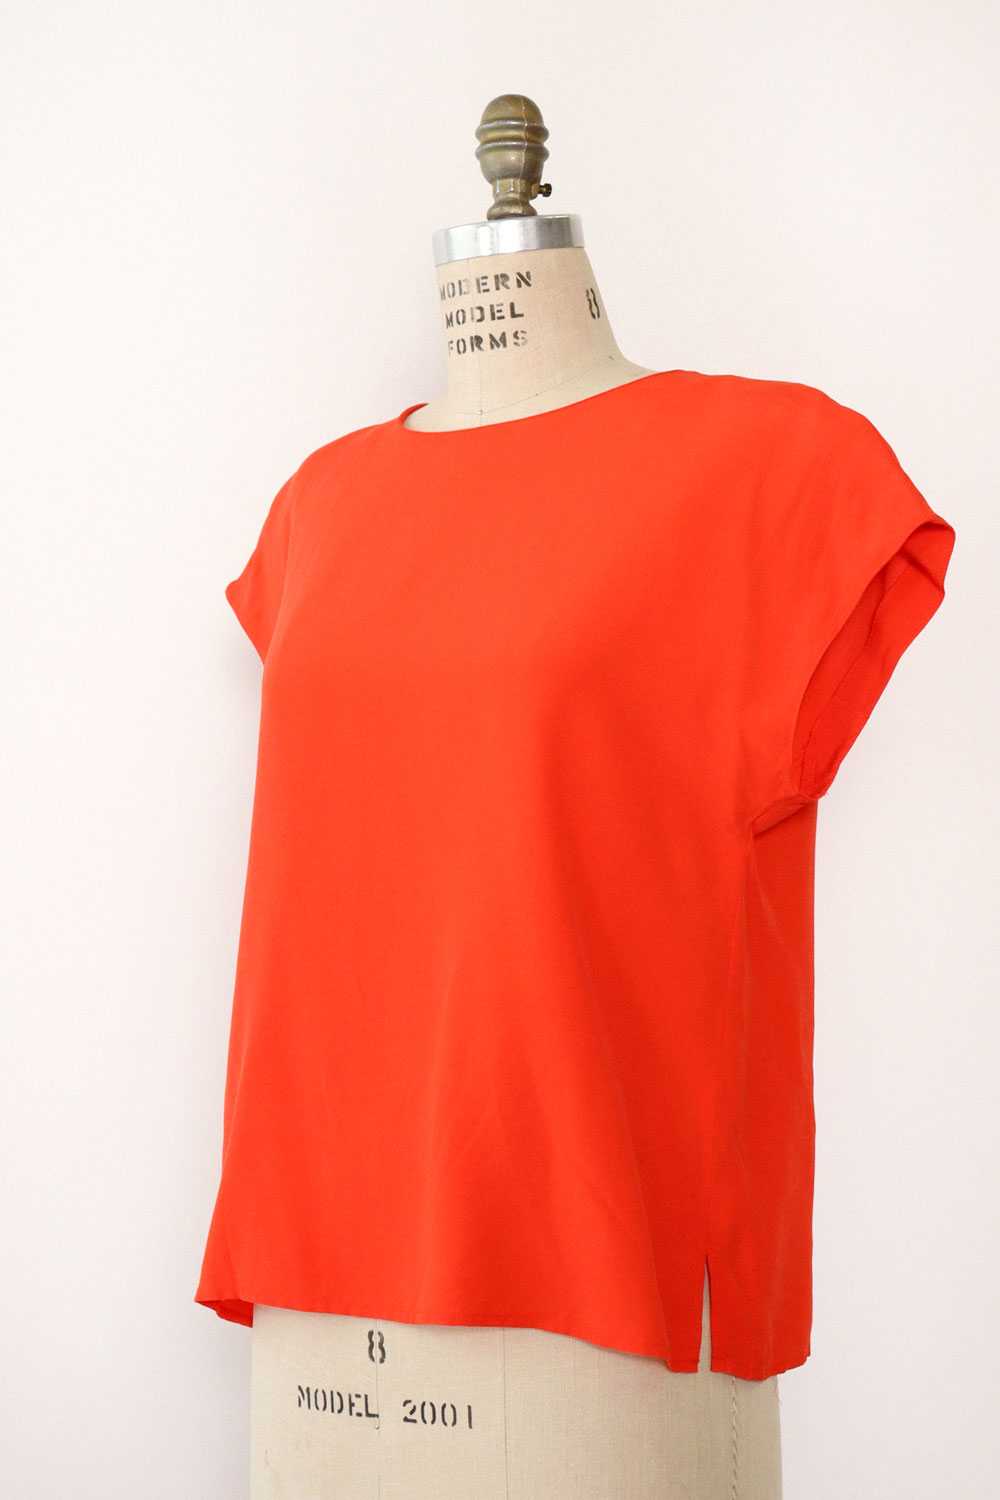 Tomato Red Silky Rayon Top M/L - image 5